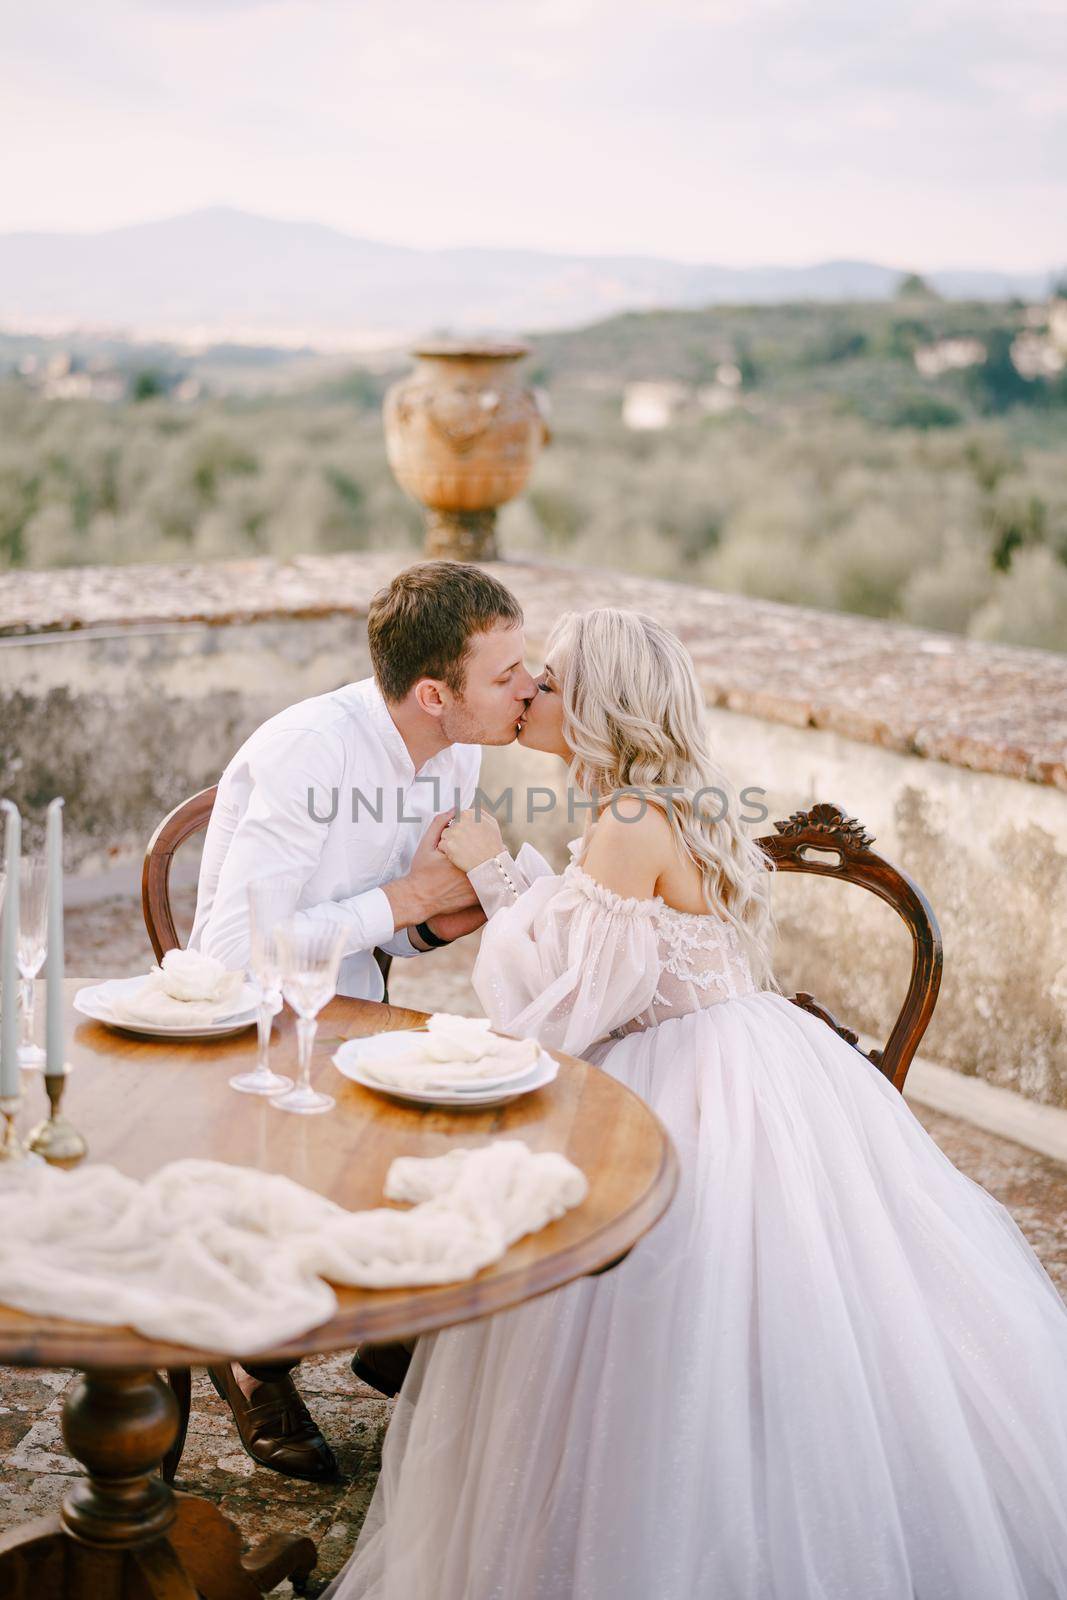 Wedding at an old winery villa in Tuscany, Italy. The wedding couple sits at the dinner table on the roof of the villa and kisses. by Nadtochiy